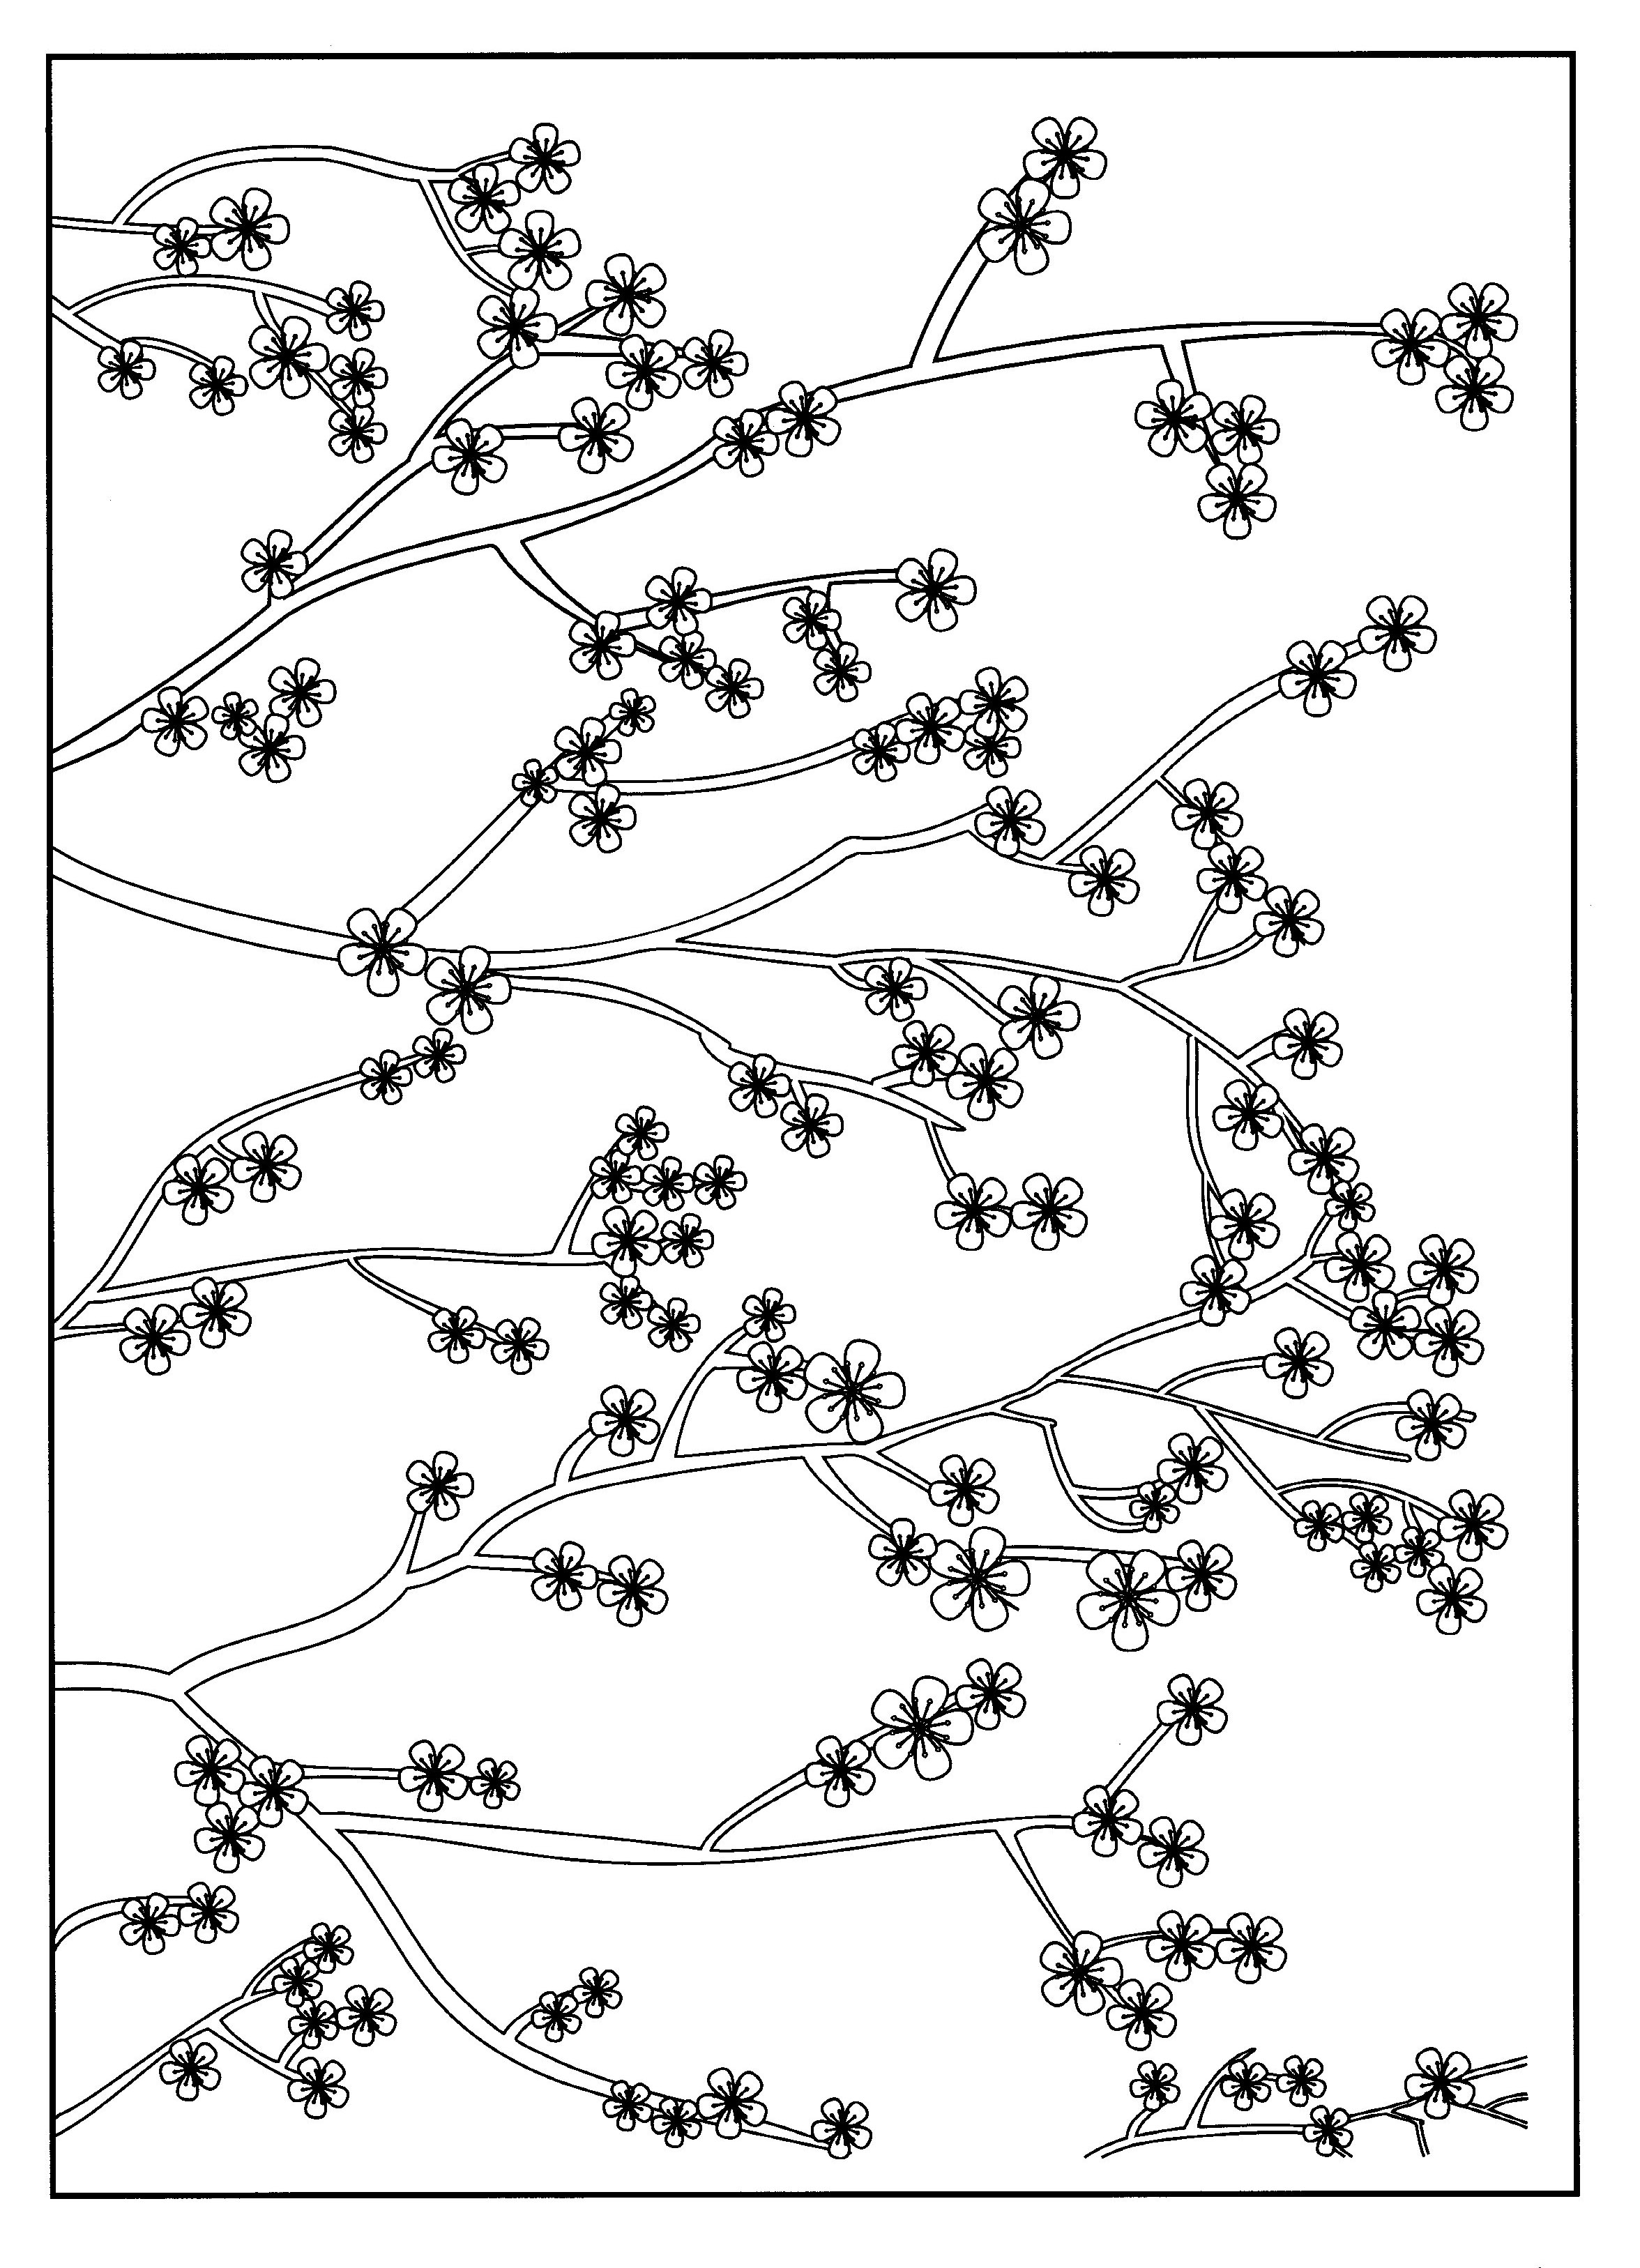 Cherry blossom - Japan Adult Coloring Pages